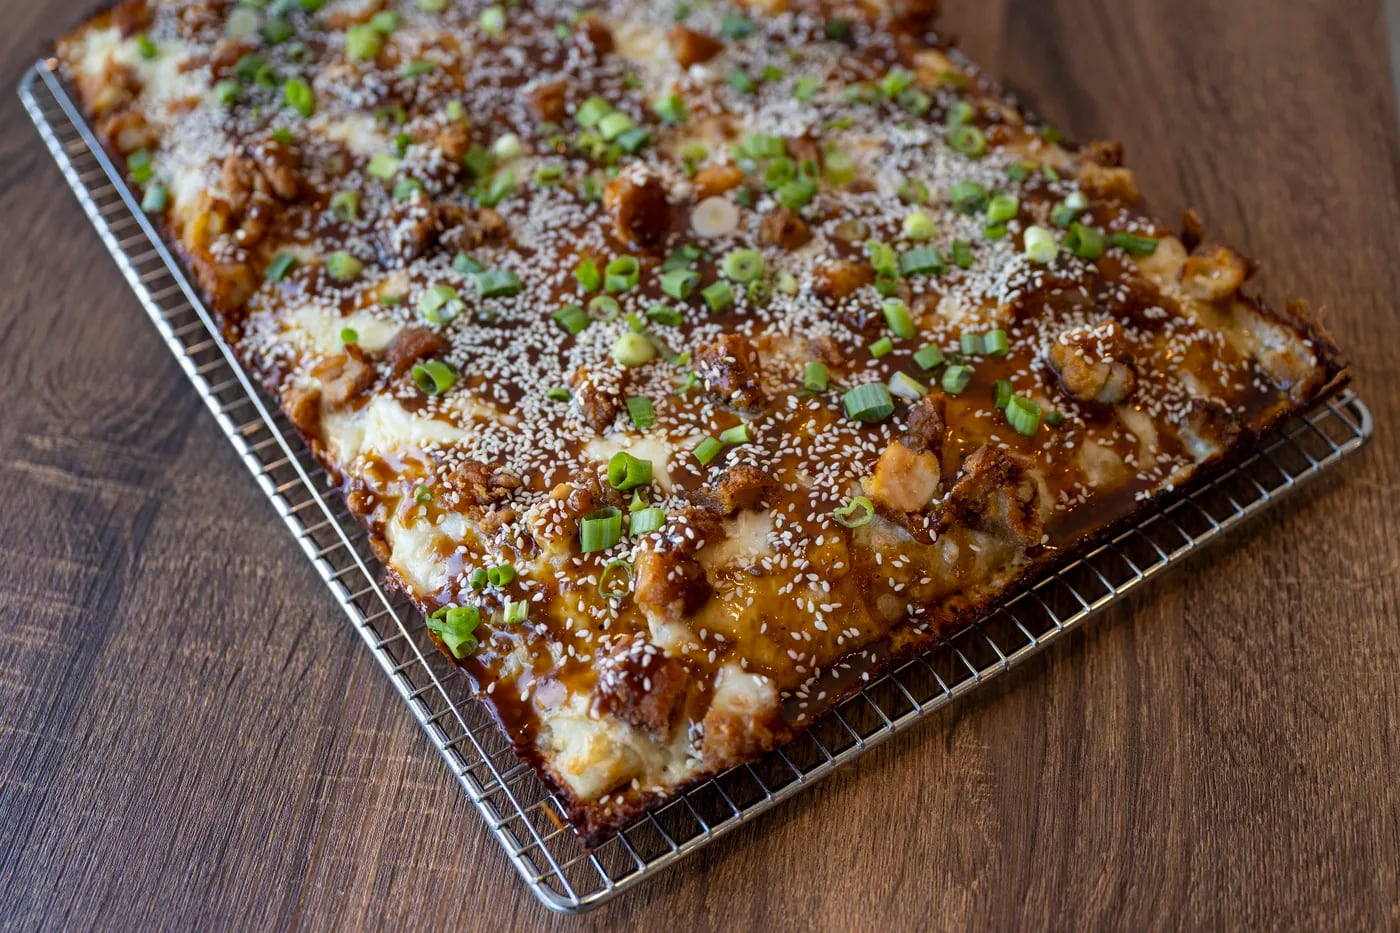 The K-pop at Bakeria 1010, a white pie topped with chicken, sesame seeds, scallions, and a sweet Korean barbecue sauce.